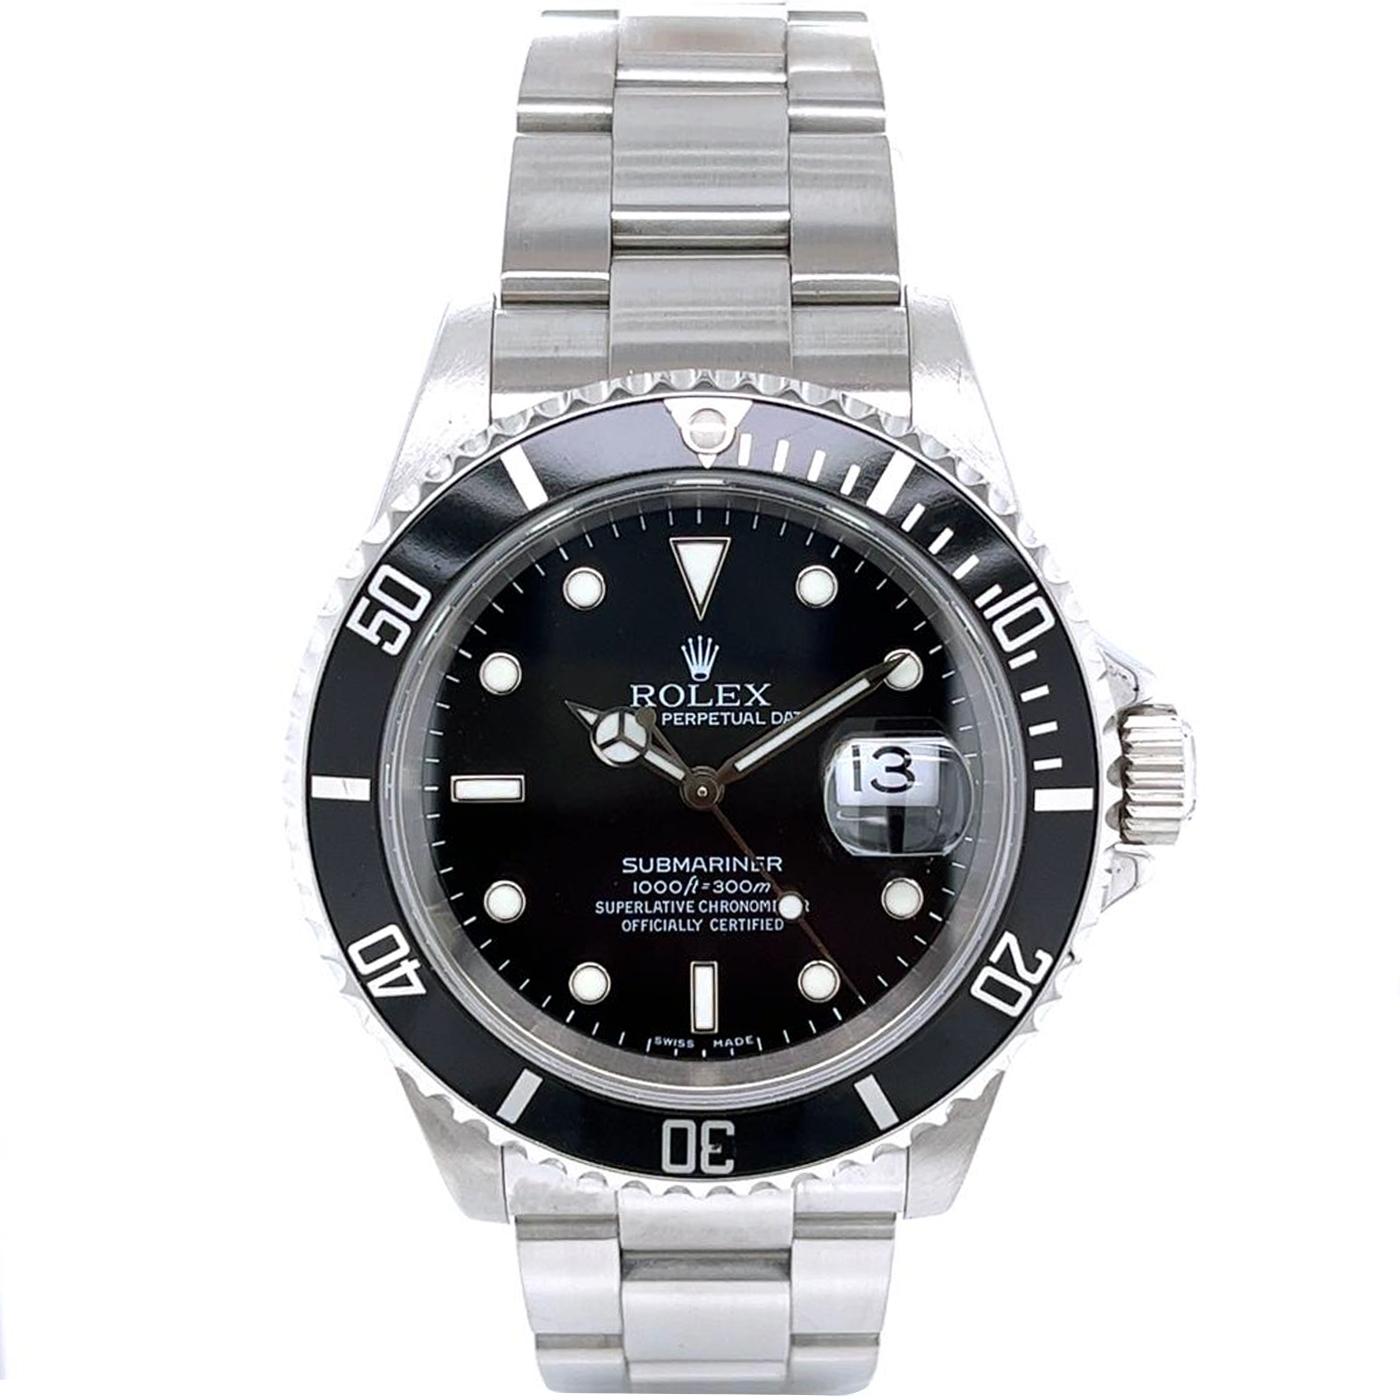 The Rolex Submariner 16610 was released in 1988 and was powered by the brands longest serving movement, the automatic Rolex caliber 3135 with the date located at the 3 o'clock position. The watch was originally fitted with black glossy dials with